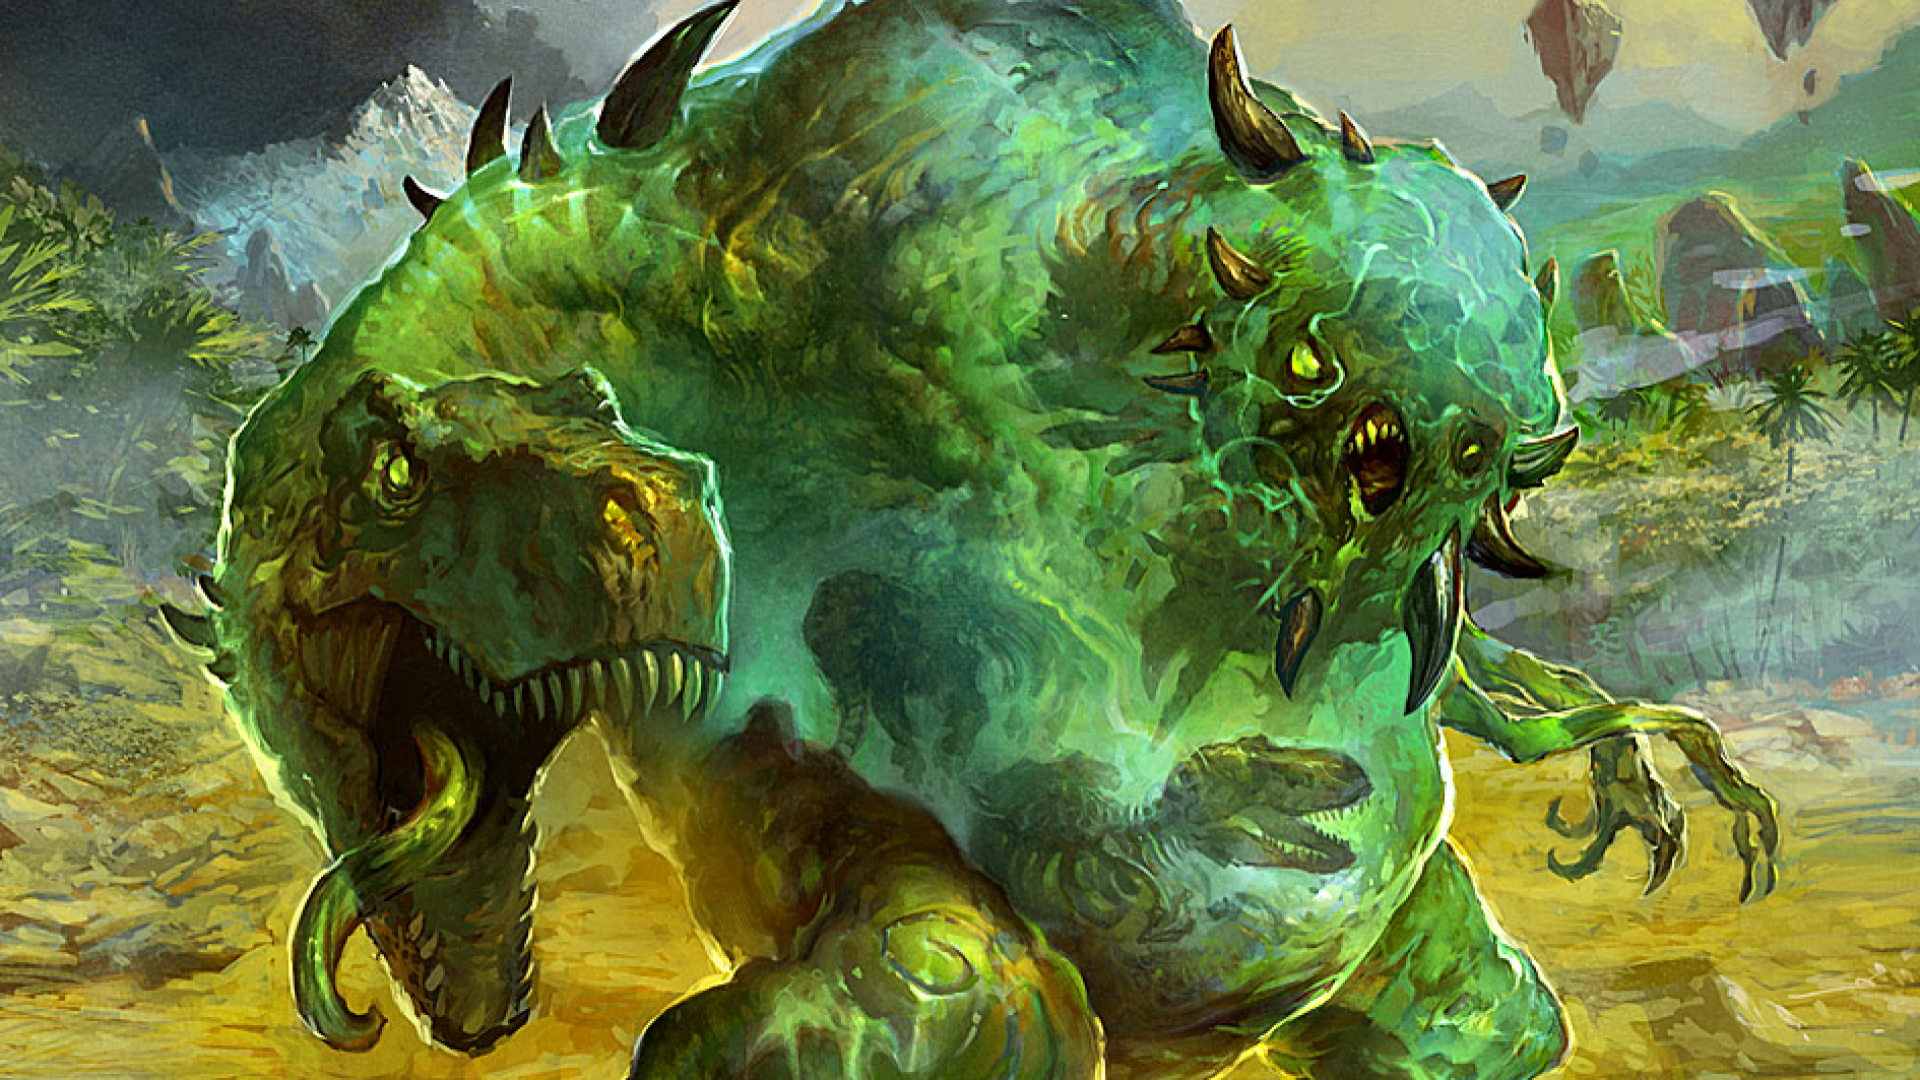 Artwork of The Mimeoplasm card from Magic: The Gathering. A translucent green slime with a T-Rex for an arm and multiple skeleton swirling in its form trudges across a field.